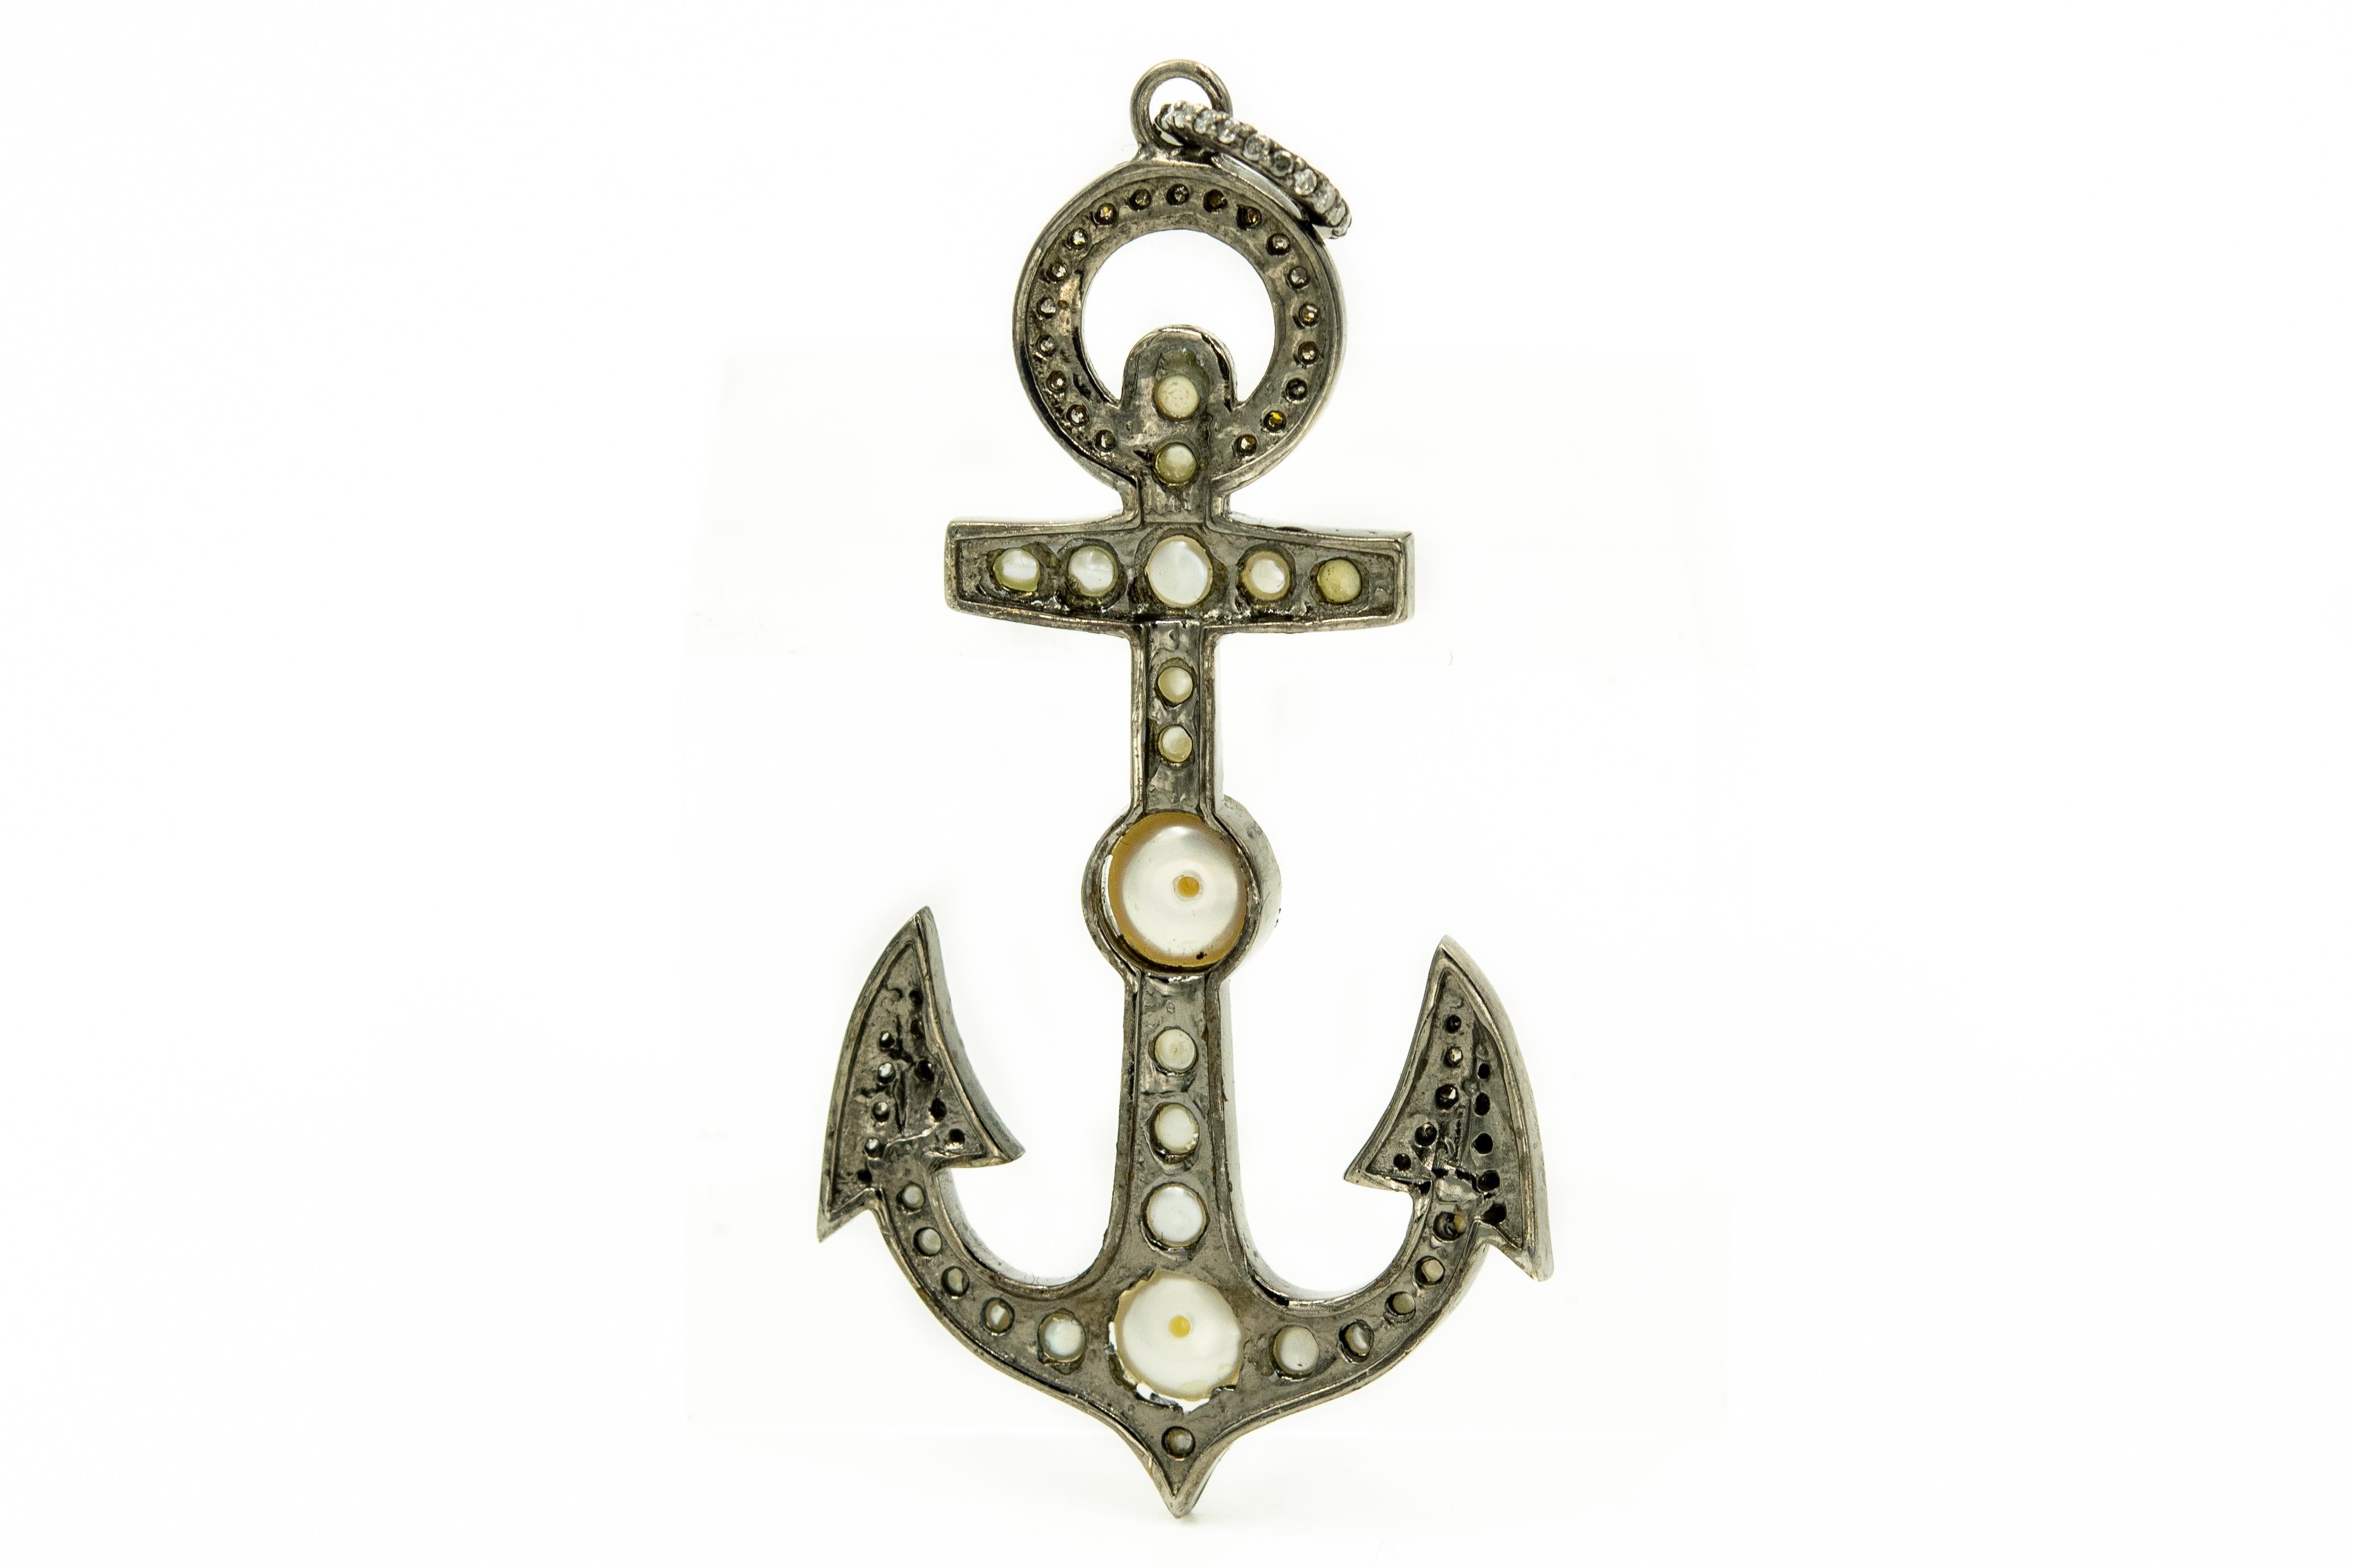 Wonderful Nautical blackened sterling silver anchor pendant with diamond and cultured pearl accents.  It is 2.25 